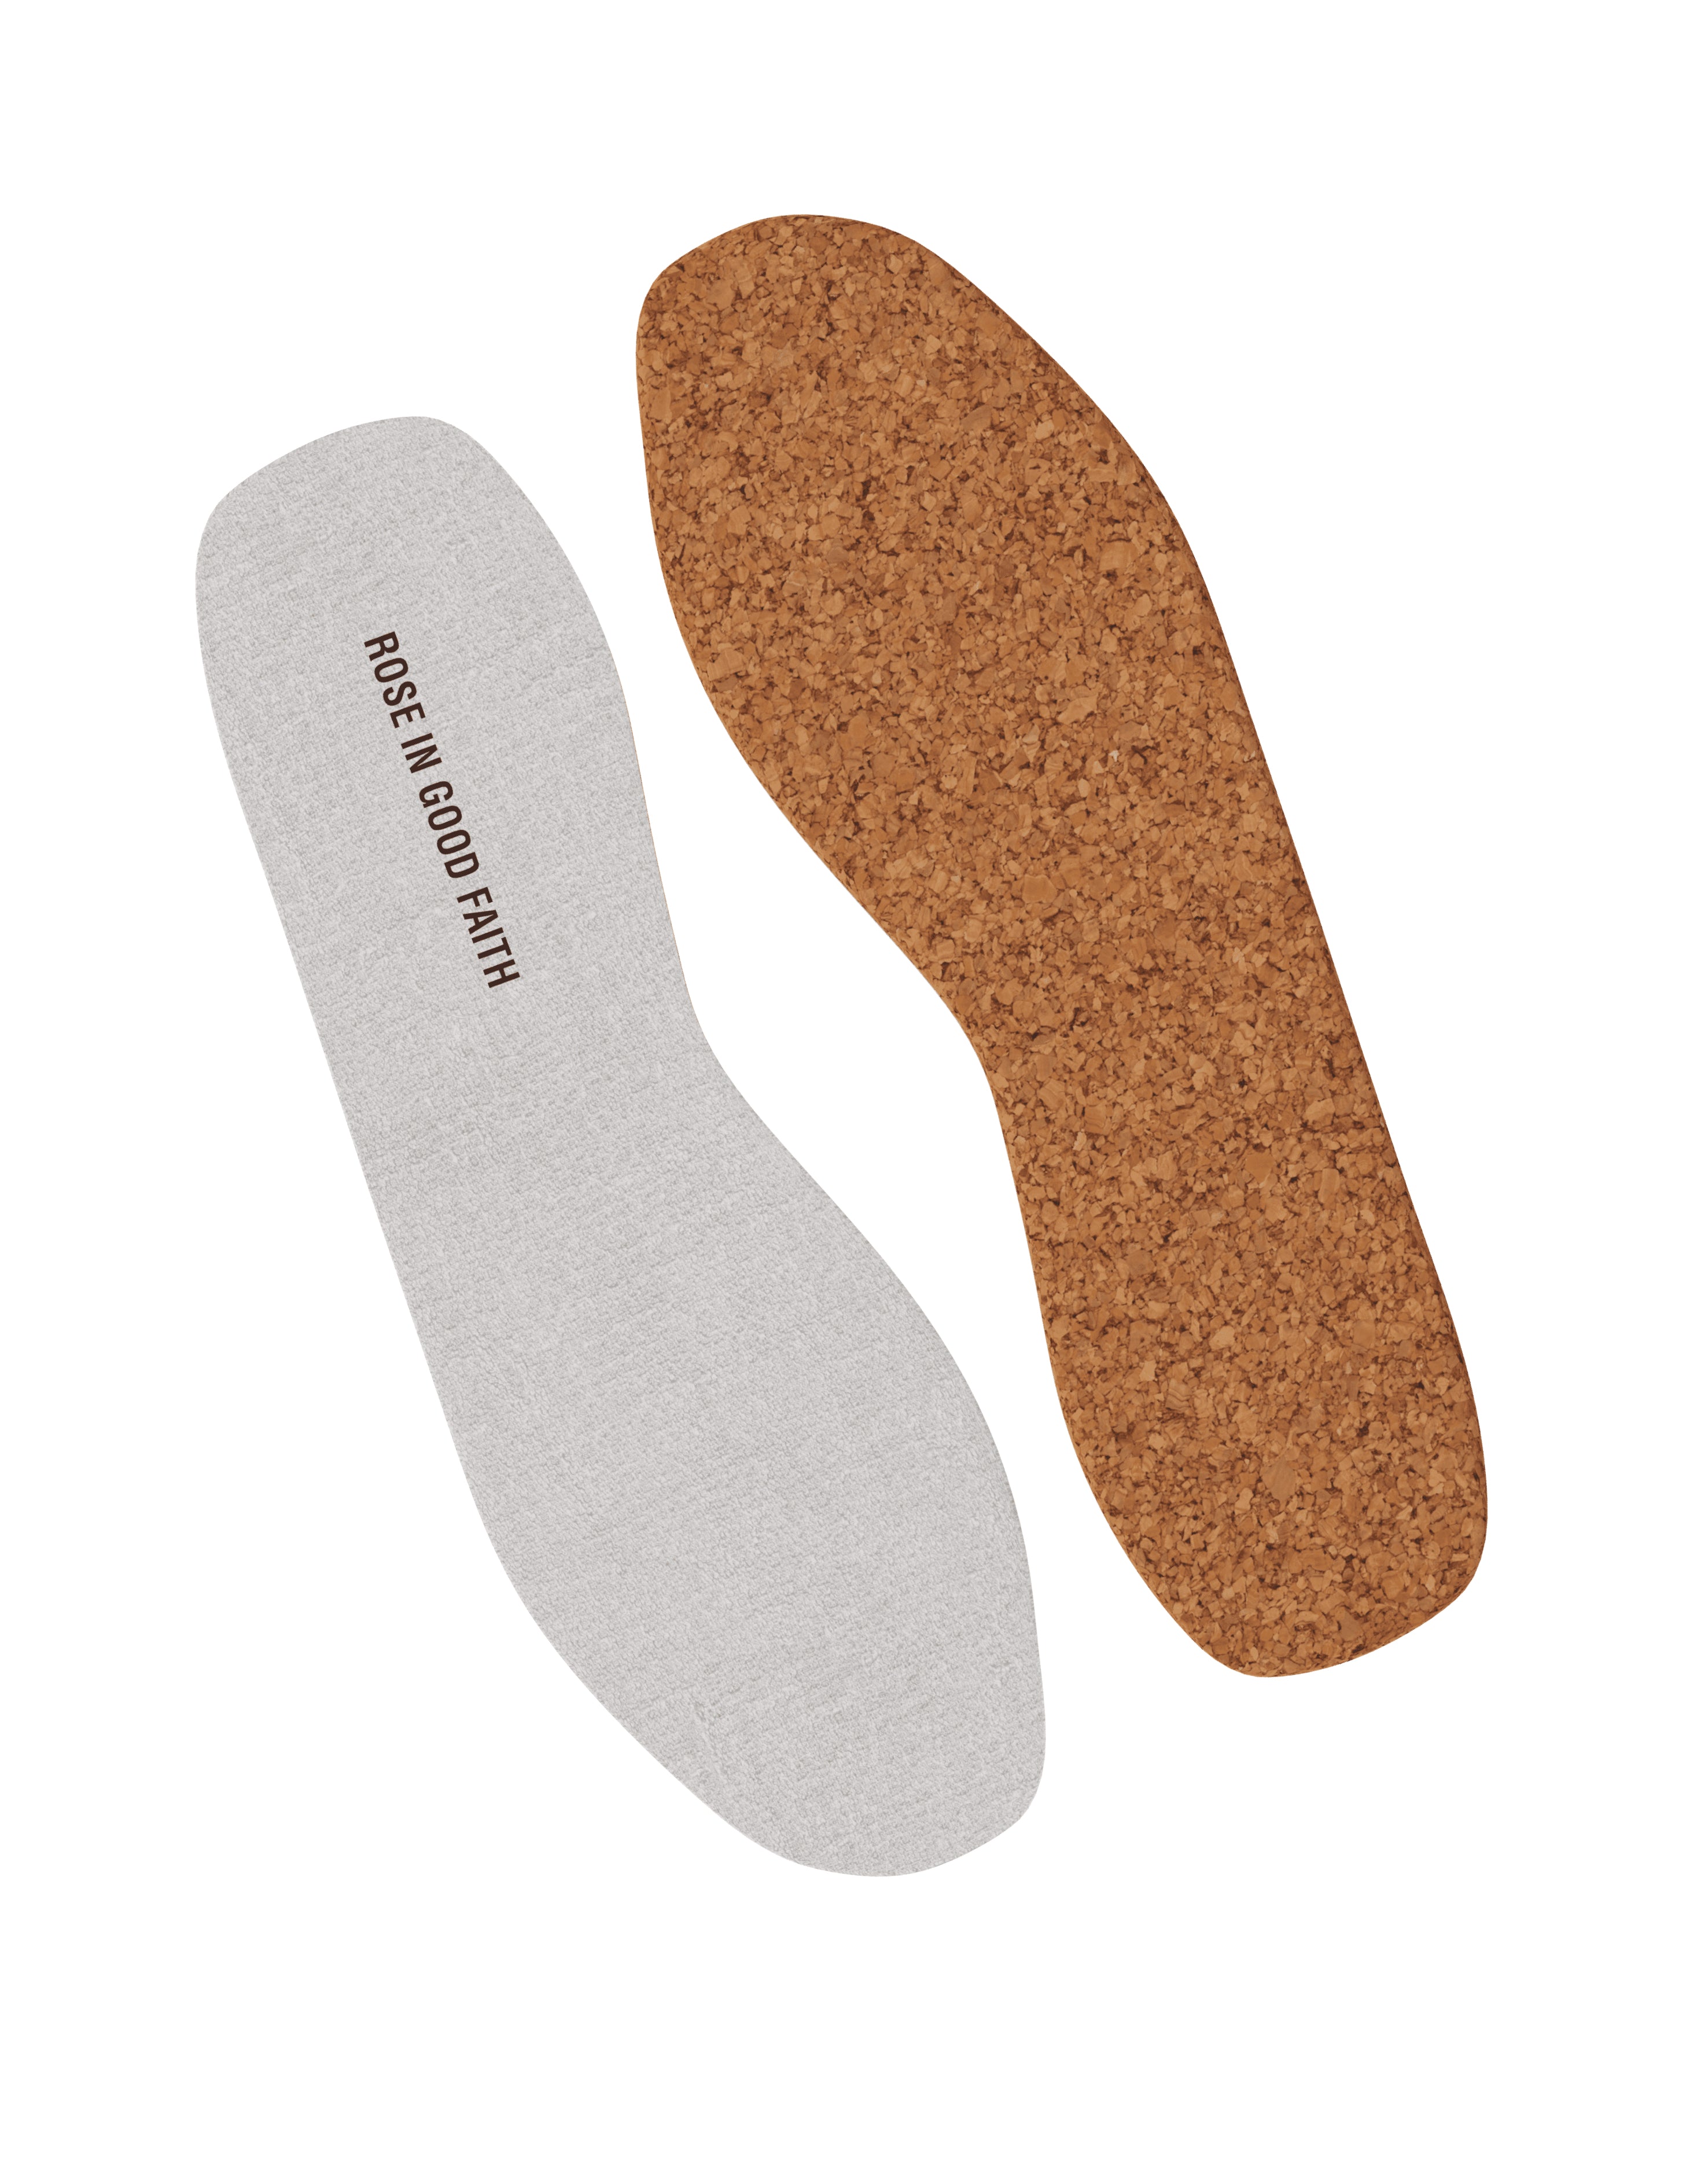 RECYCLED CORK INSOLE